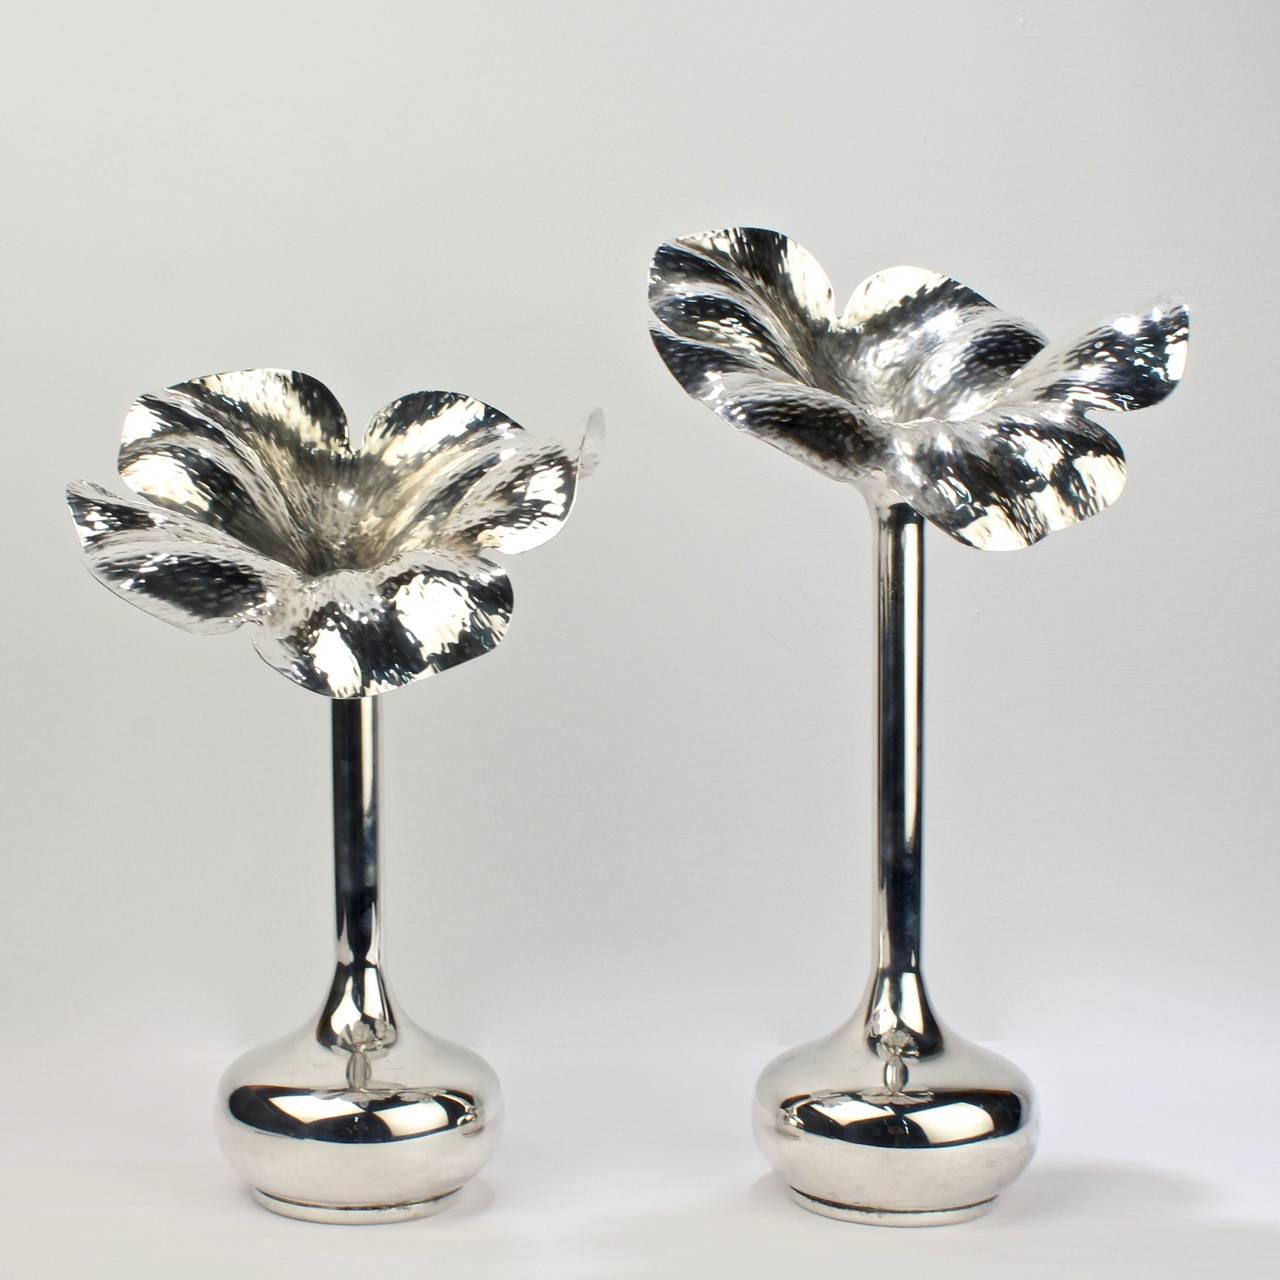 A fine pair of large modernist silver plated flower vases by the Brazilian designer Marilena Mariotto. 

Each with a bulbous base, elongated neck, and wonderful hand hammered (almost explosive) stylized floral tops. 

Signed to the bases: